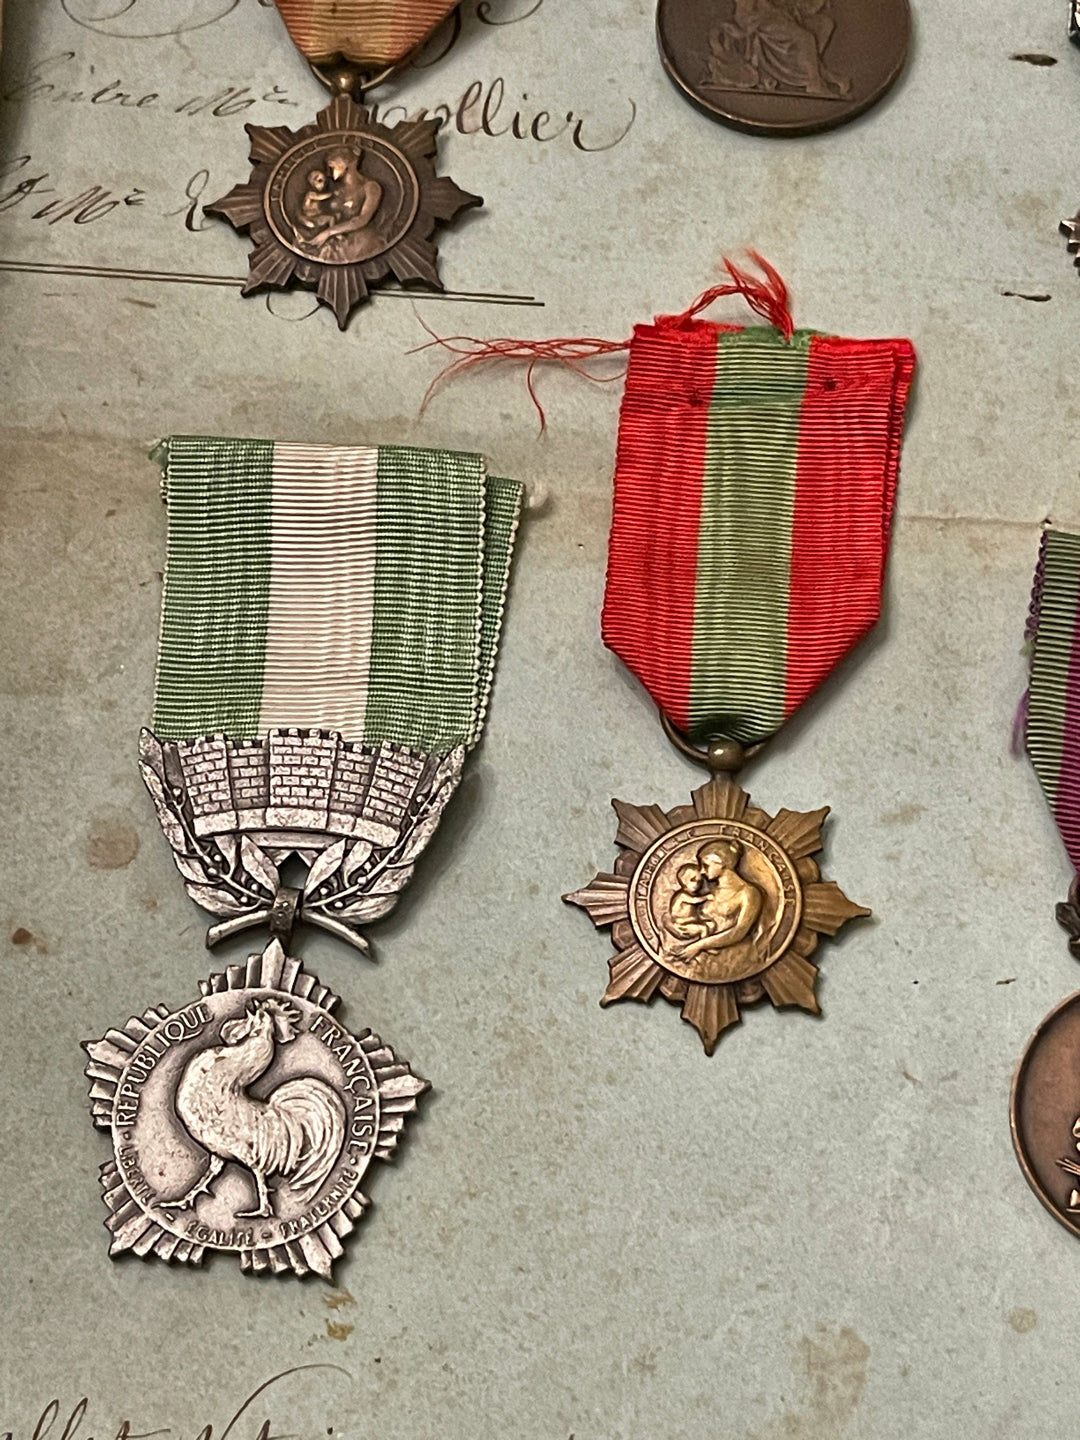 Antique French Medals - A